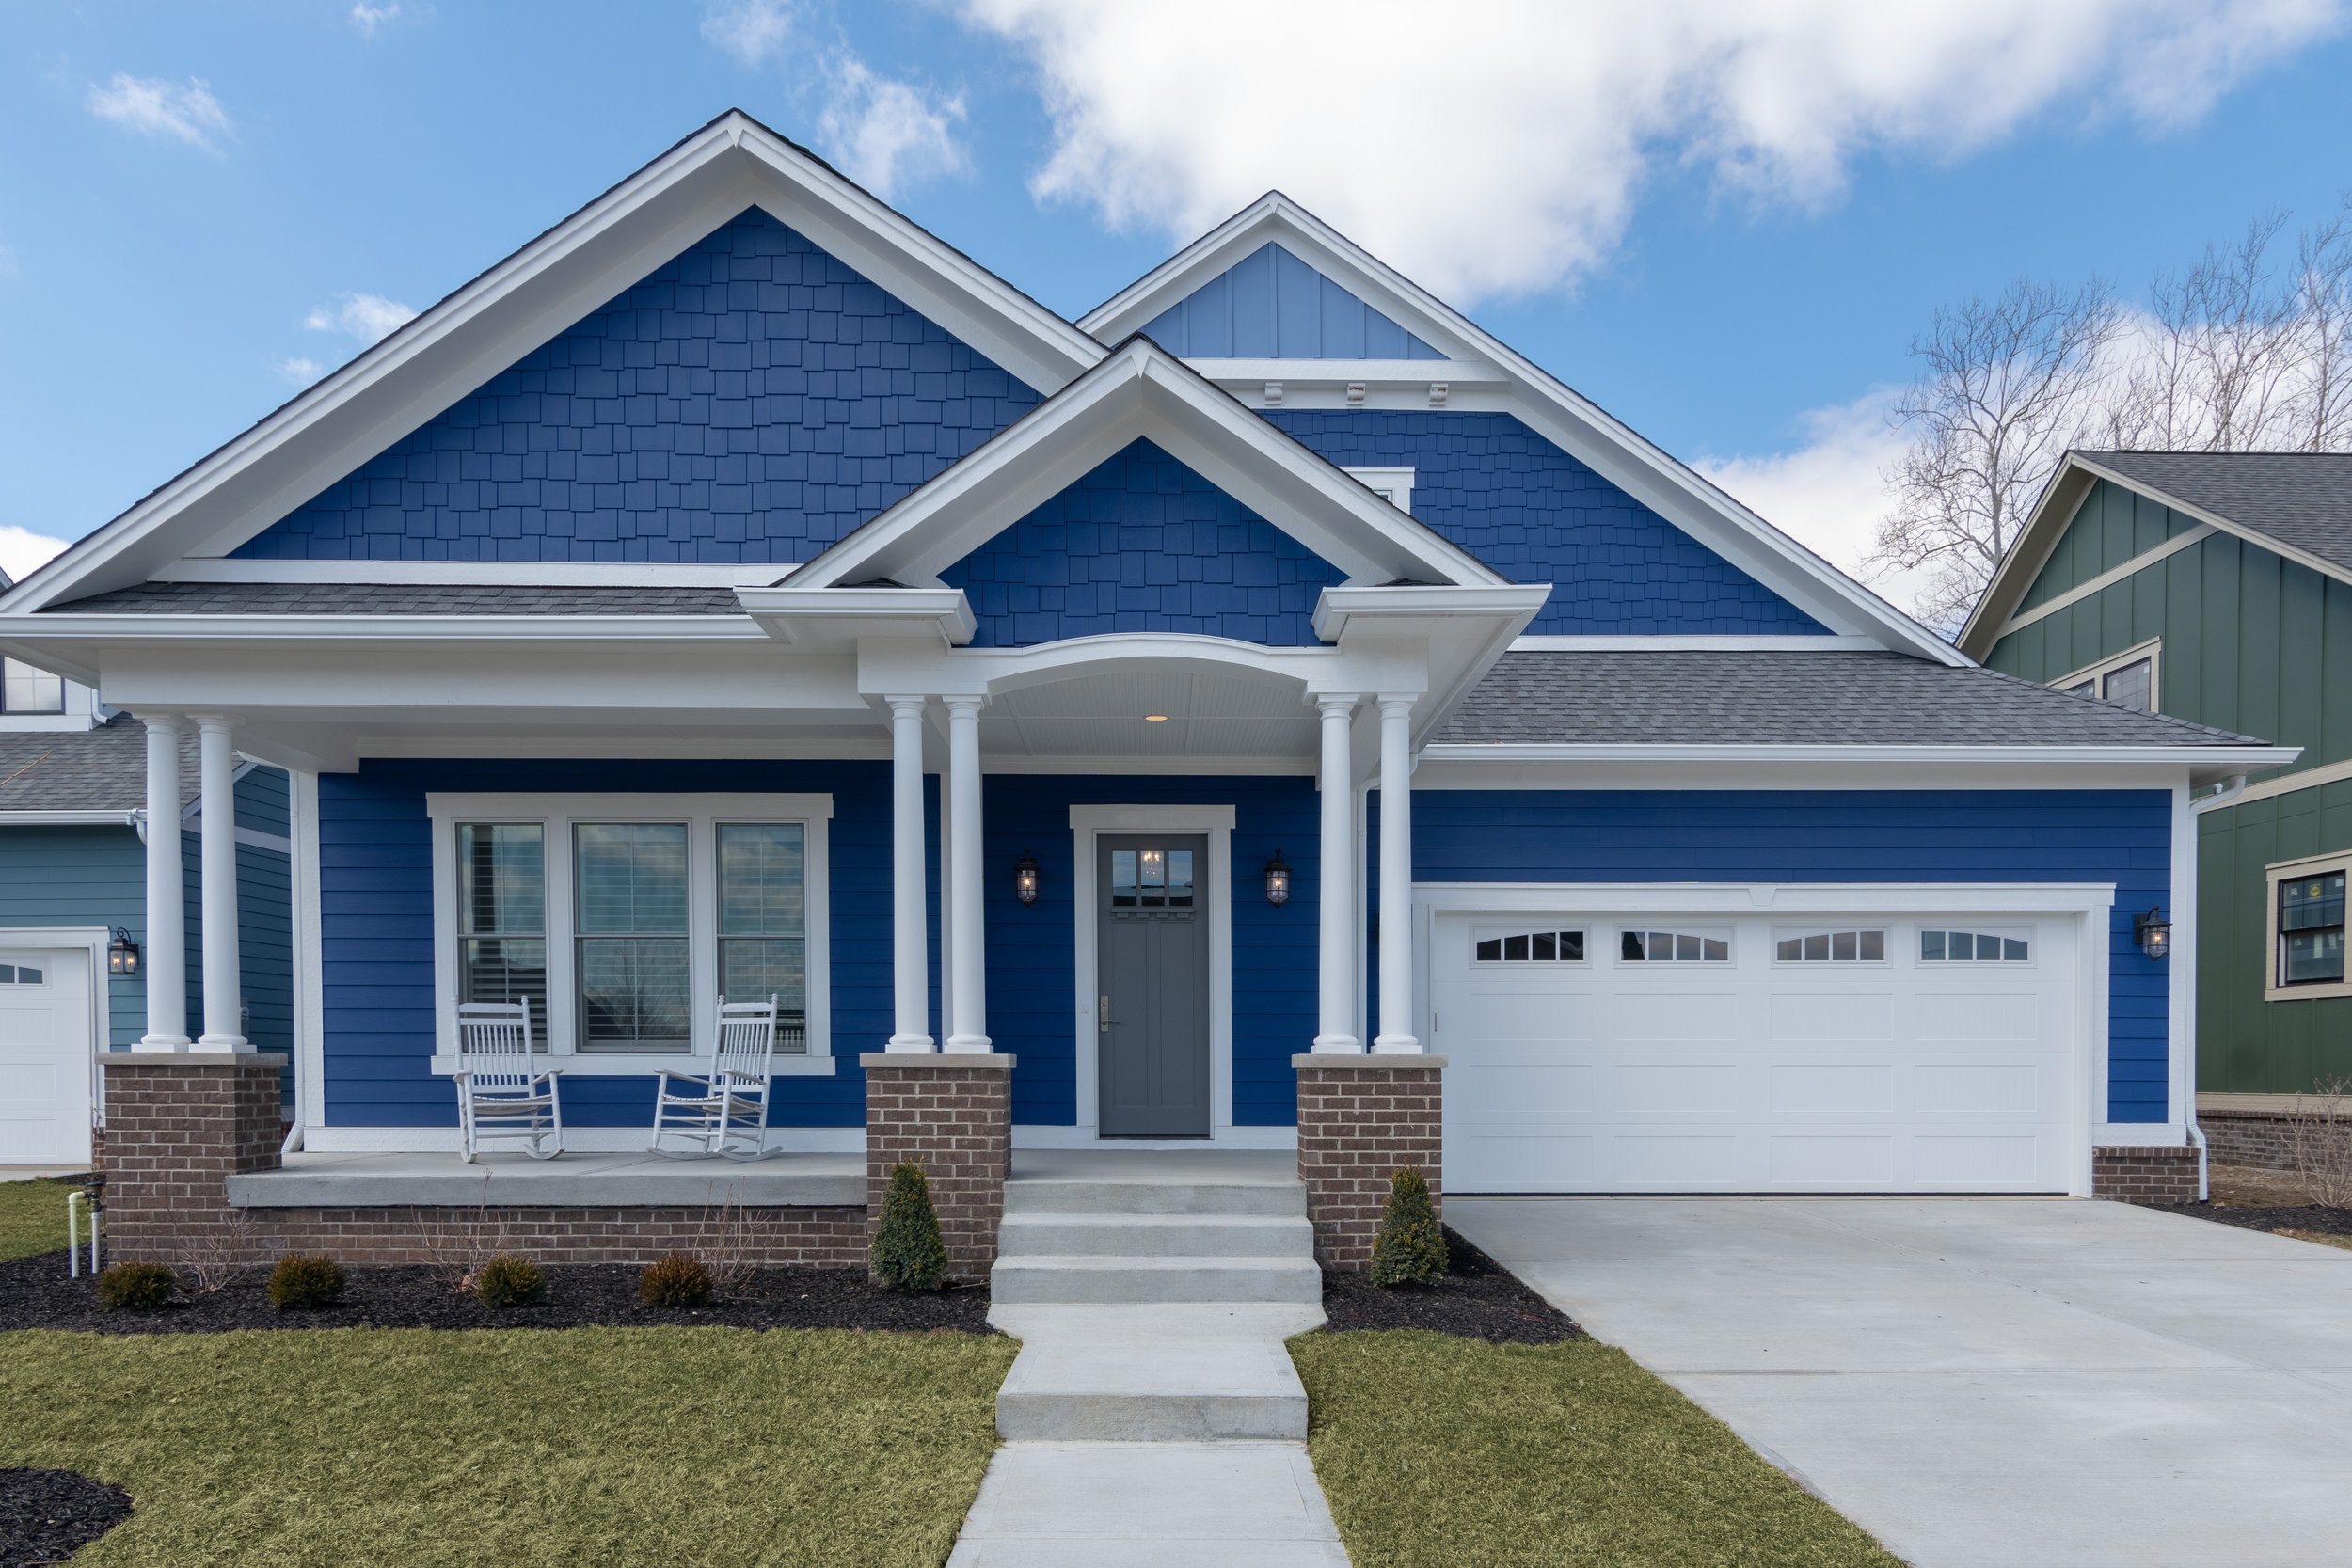 The exterior of a blue home with white trim built by a Custom Home Builder in Carmel Indiana.